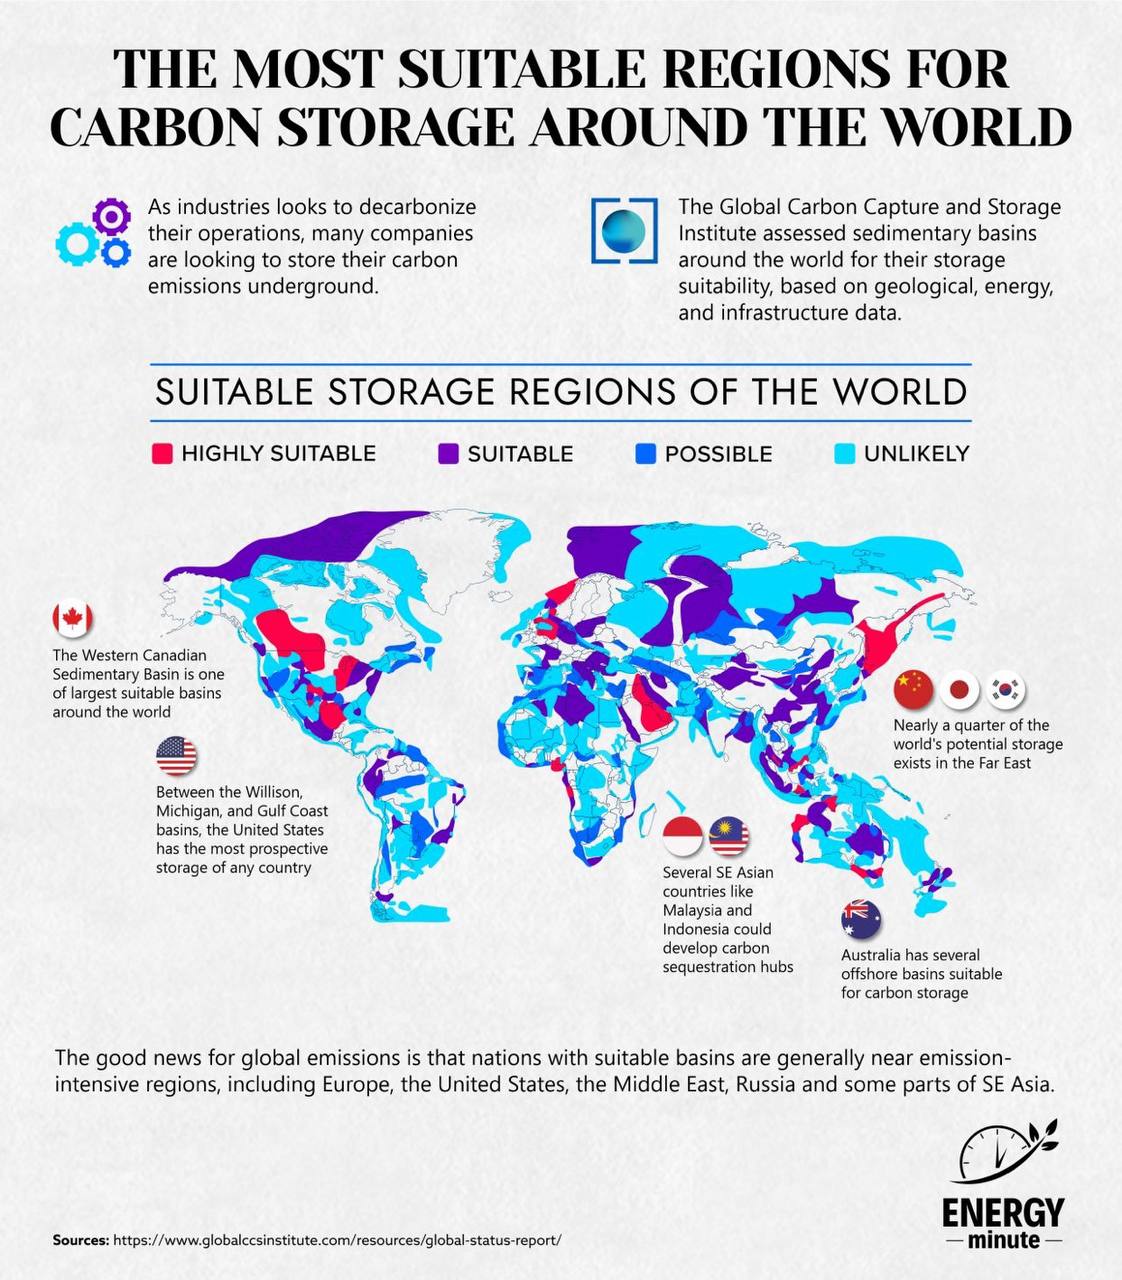 https://energyminute.ca/single/infographics/2168/the-most-suitable-regions-for-carbon-storage-around-the-world